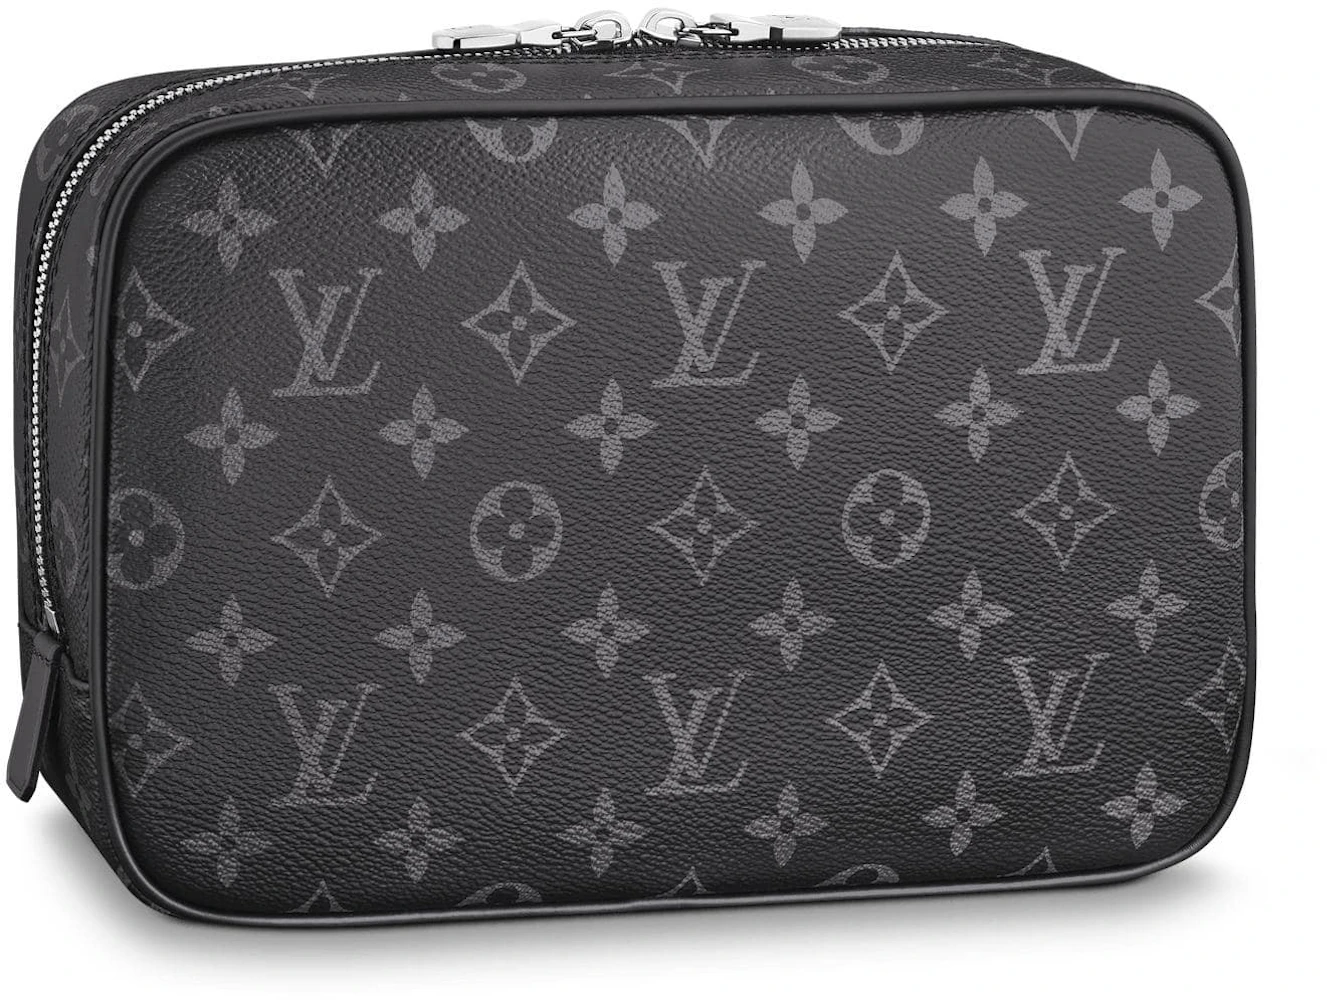 The Luxury Shopper - Louis Vuitton Toiletry Pouch sourced for a VIP in  Australia 🇦🇺 +447956049044 📱 hello@theluxuryshopper.co.uk 📩  www.theluxuryshopper.co.uk 🖥 Worldwide shipping 🌍